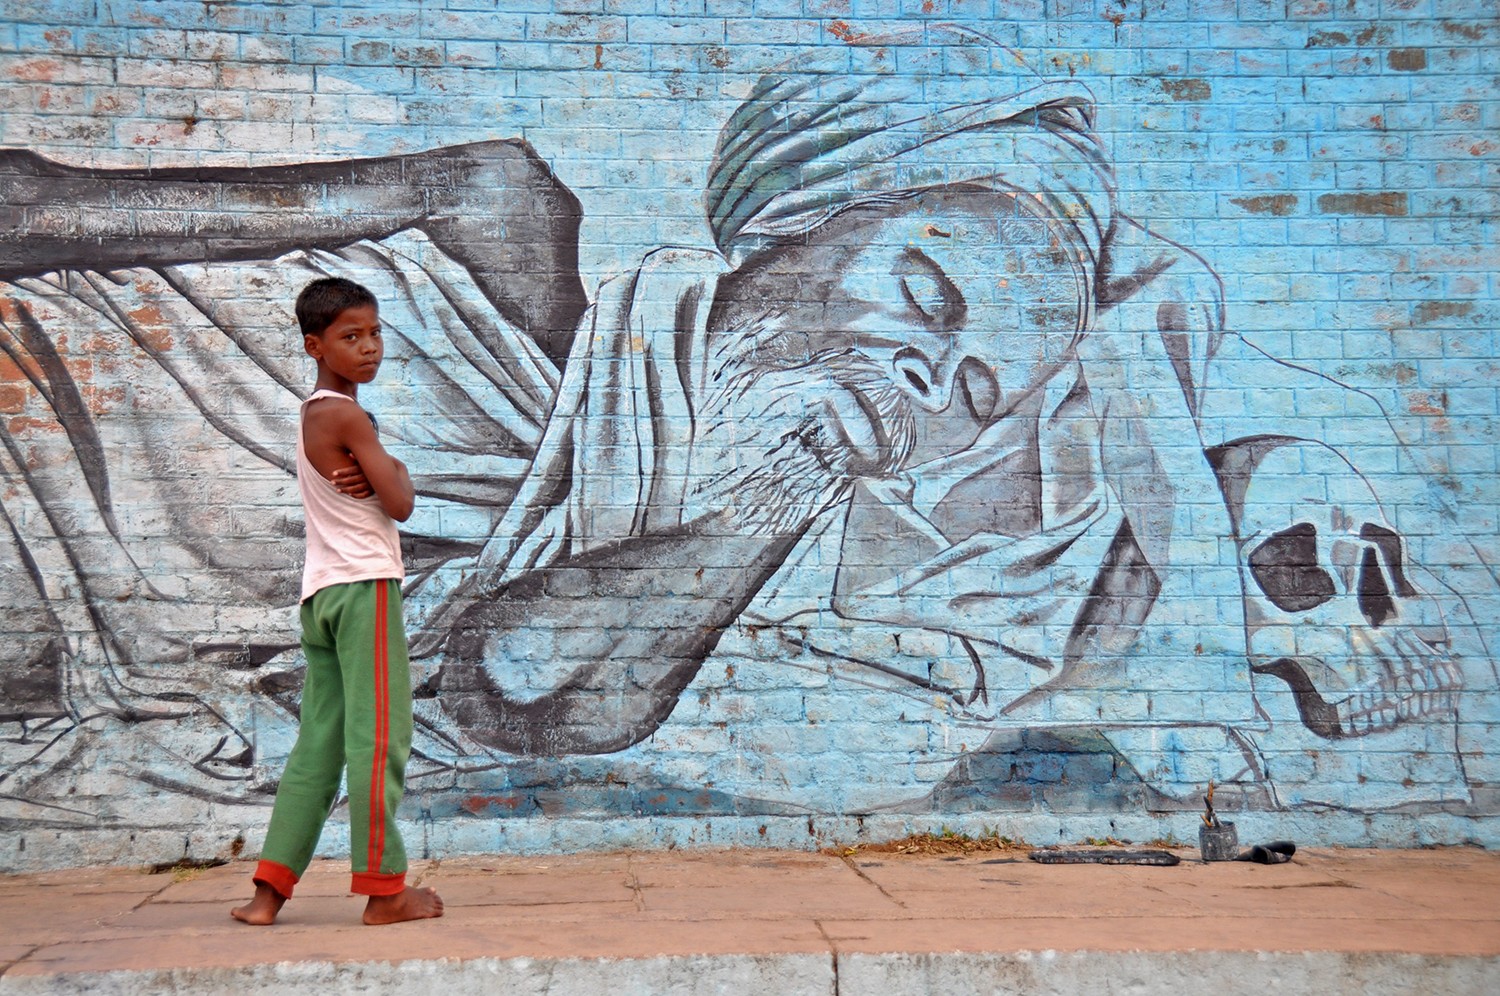 Street mural and little boy in India